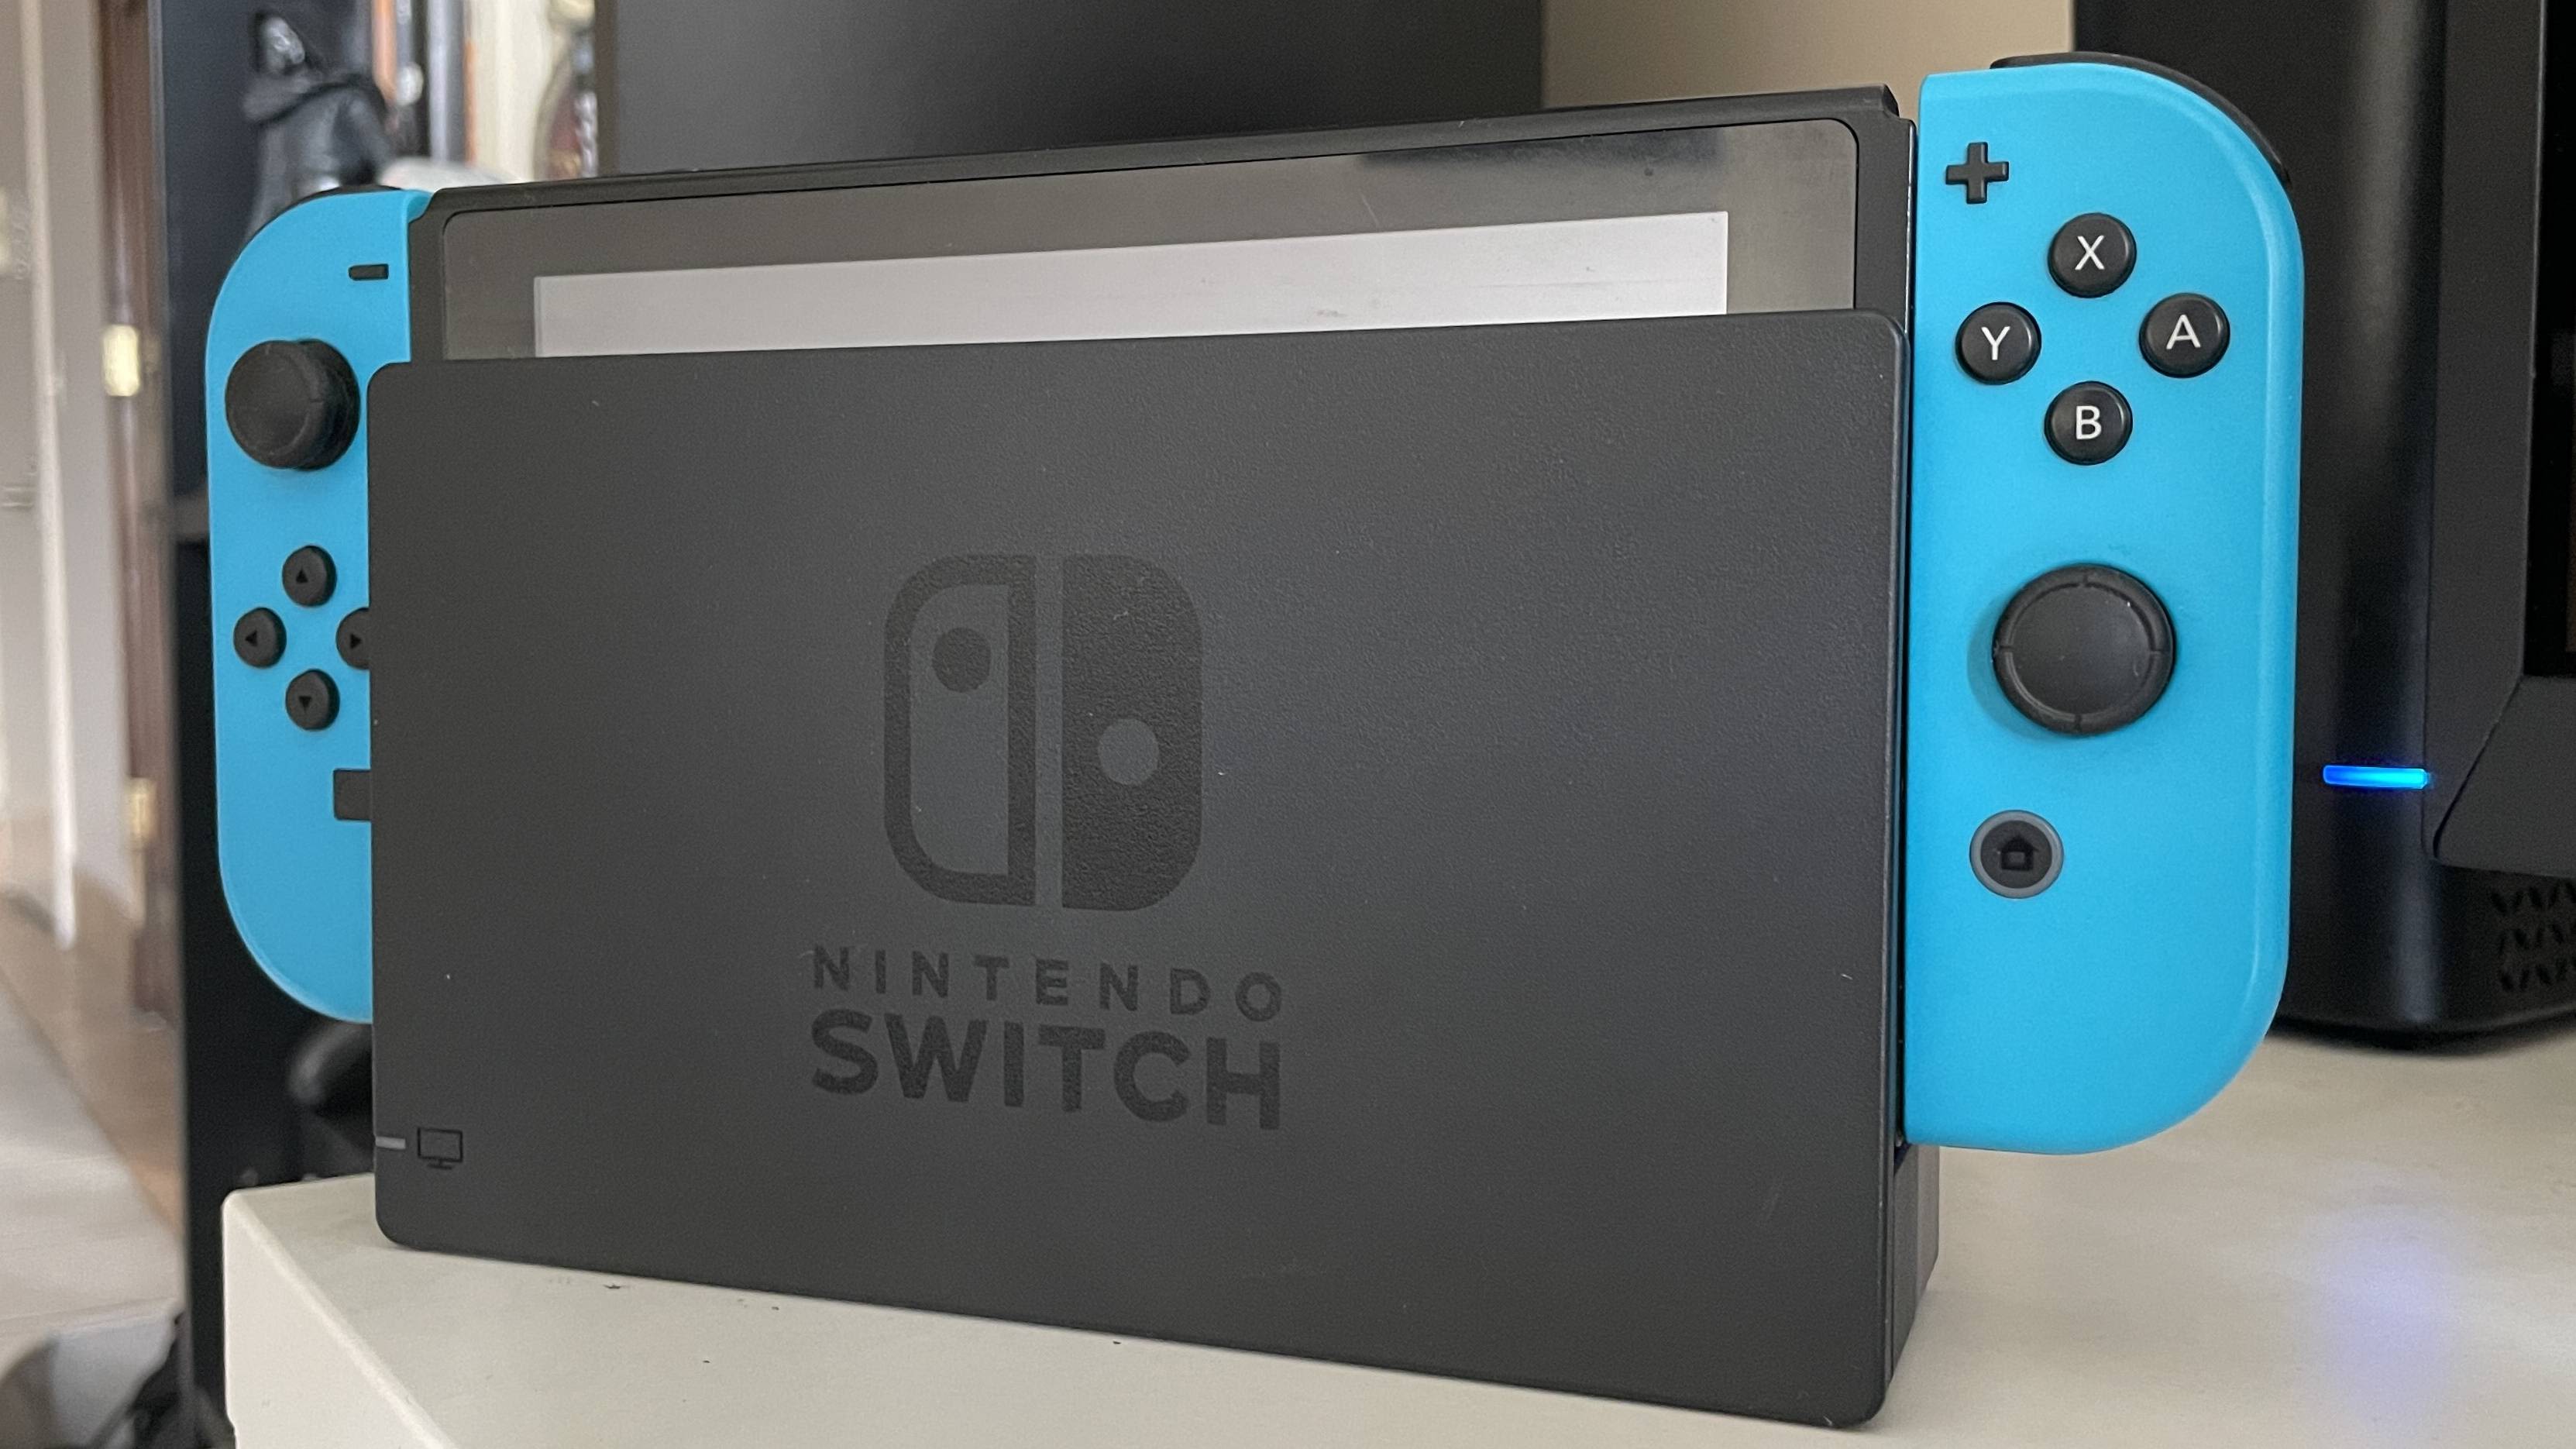 Nintendo Switch buying guide: What you need to know - Android Authority